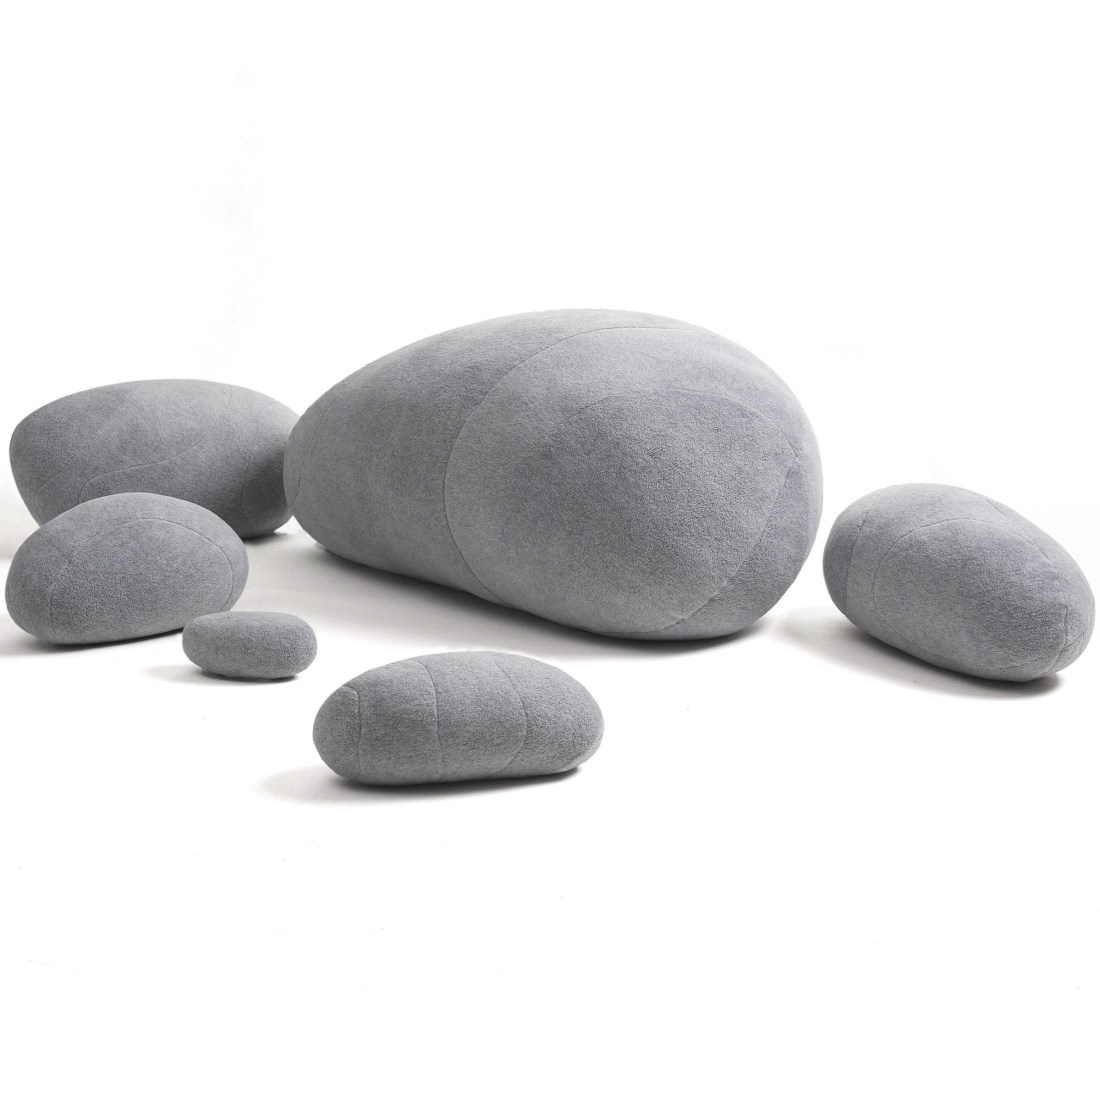  Sheicon Three-Dimensional Curve Realistic Stones Floor Pillows  Creative Home Decoration Stuffed Throw Pillows Big Rock Pillows Pebble  Pillows Color A3 : Home & Kitchen